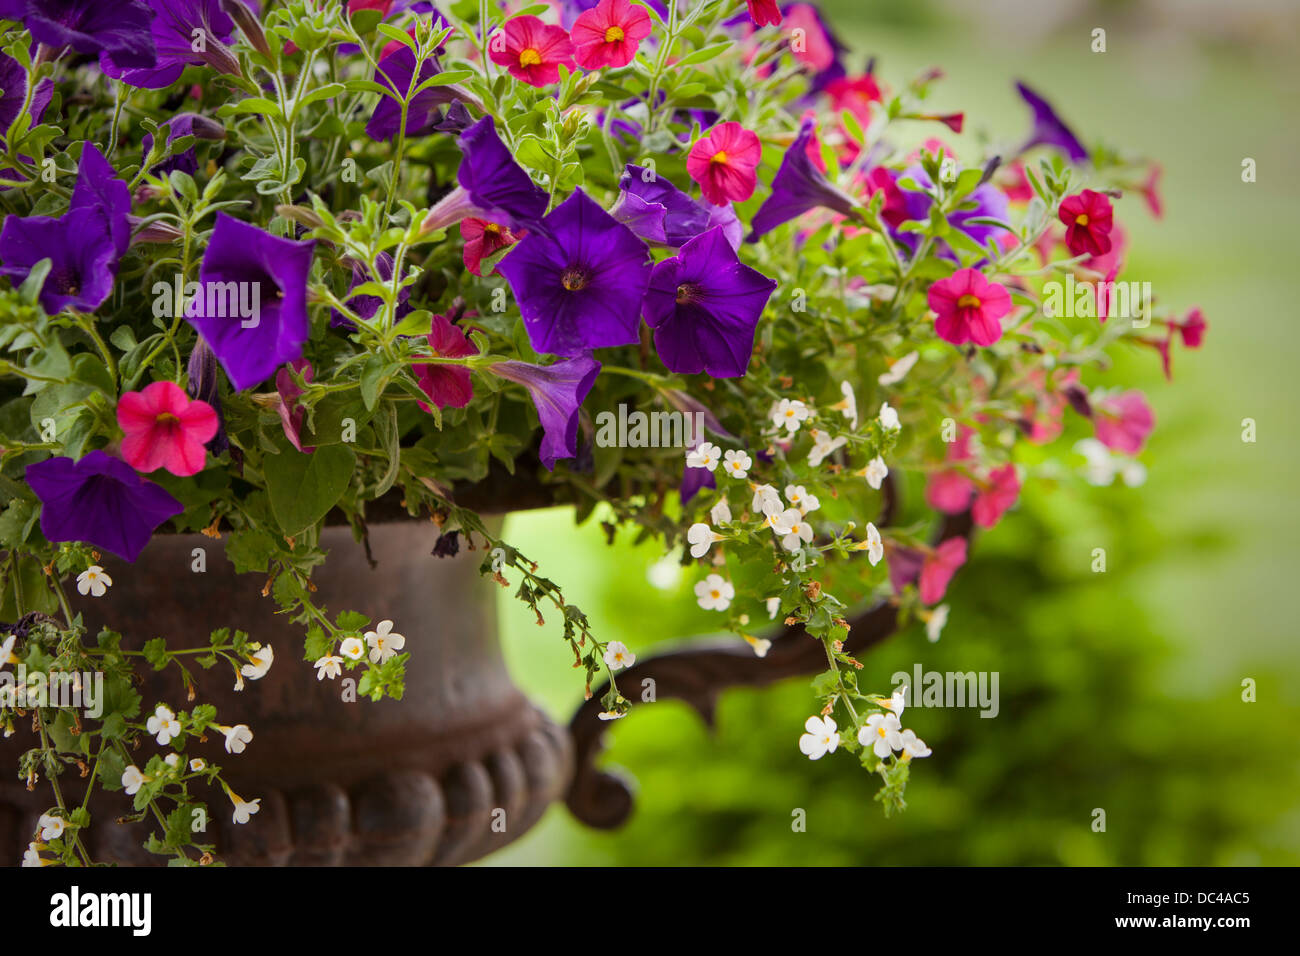 Colorful flowers in a cast iron pot Stock Photo